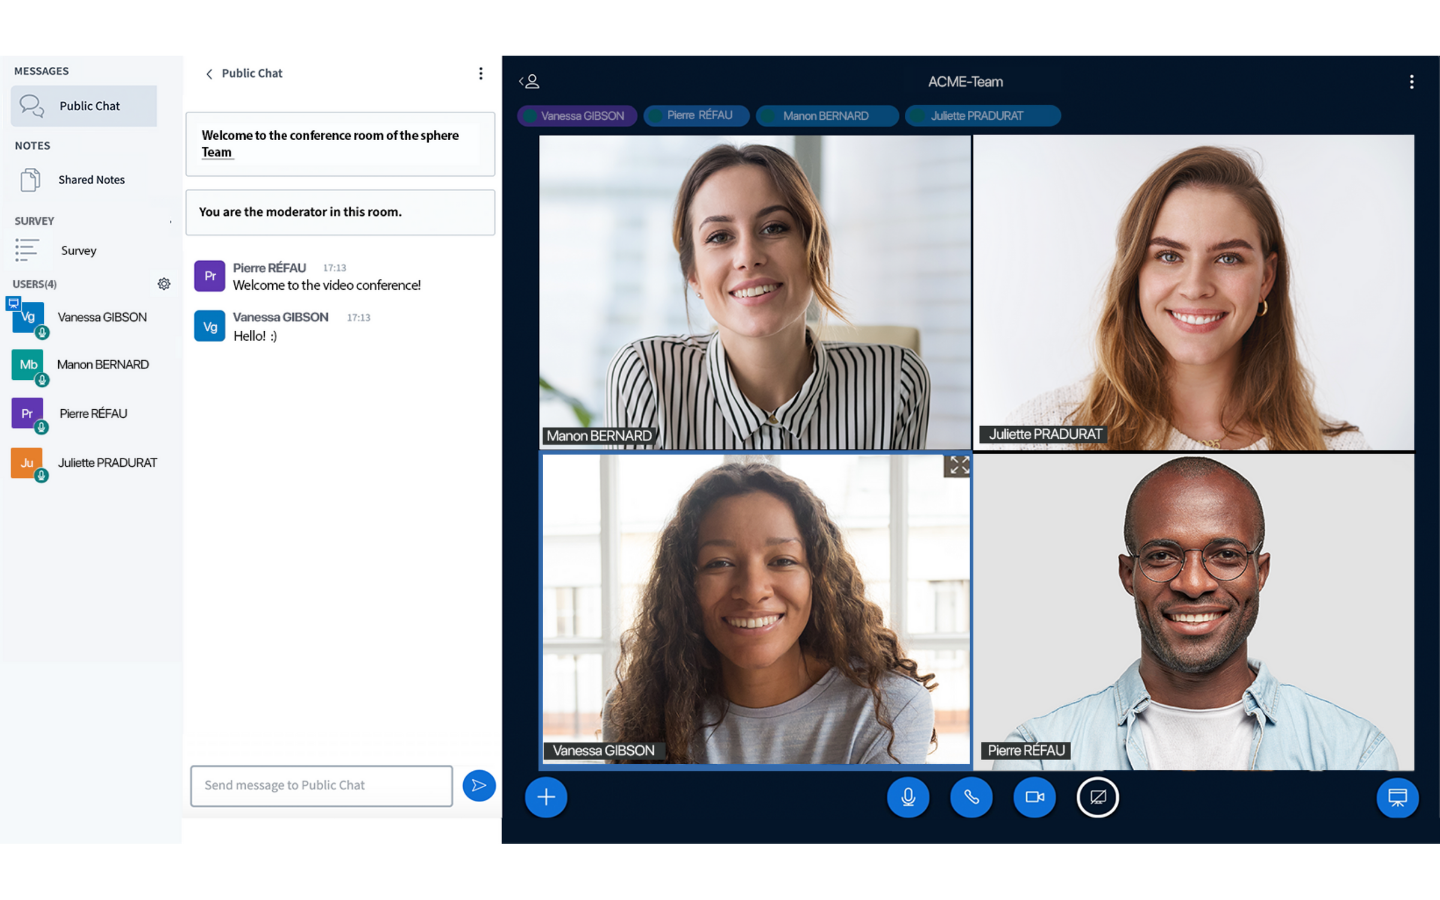 The Whaller platform offers one click access to a variety of video conferencing solutions including BigBlueButton, Glowbl, Jitsi Meet and Whereby.